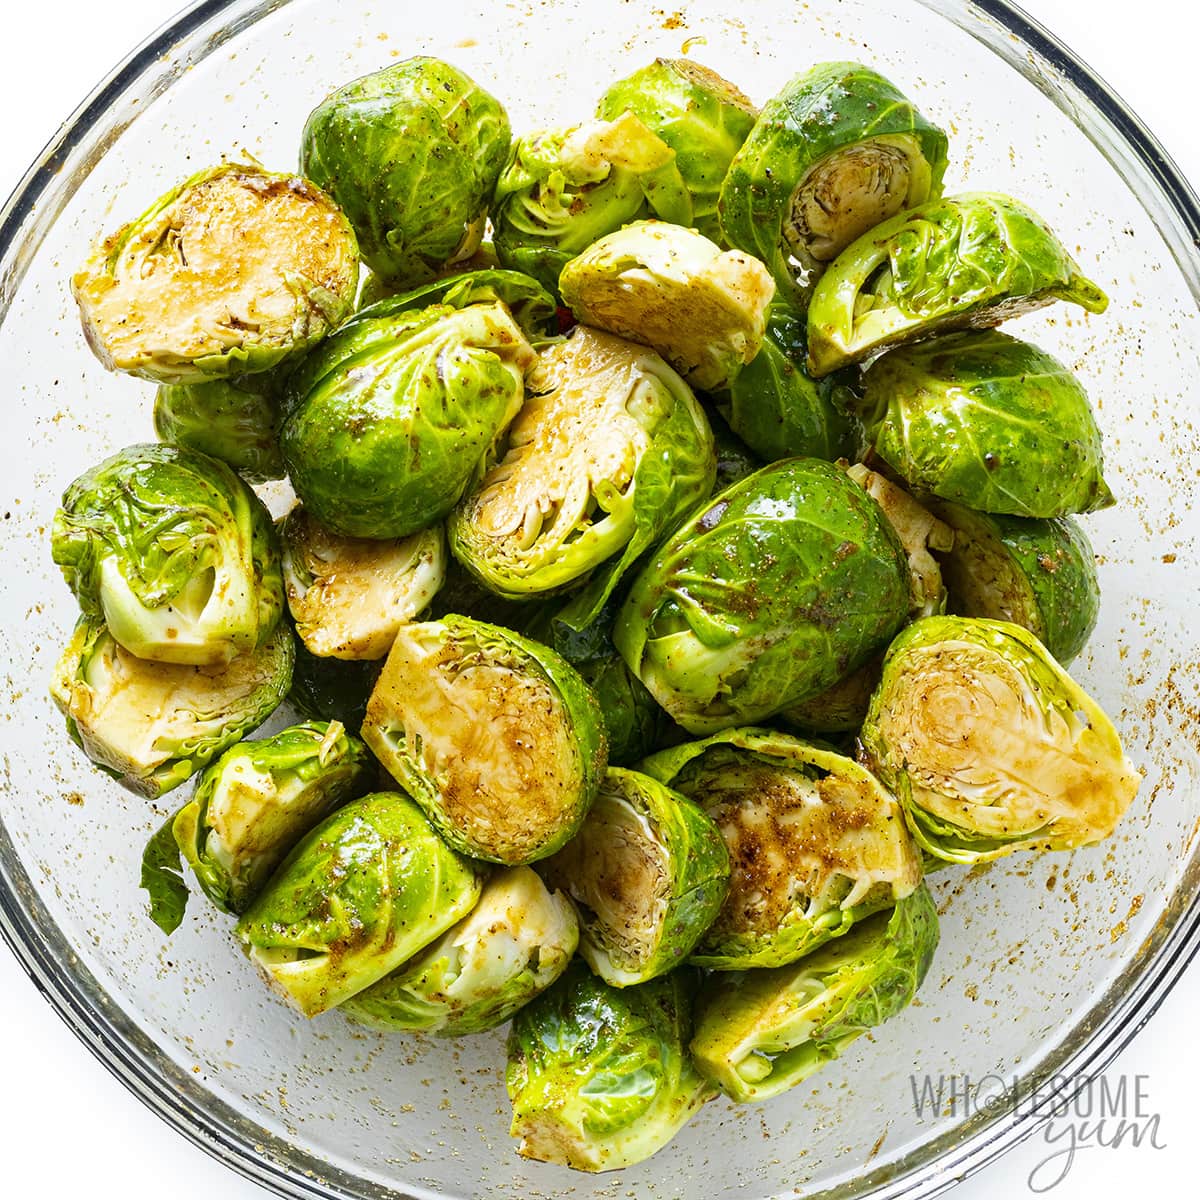 Halved brussels sprouts, seasoned in a bowl.